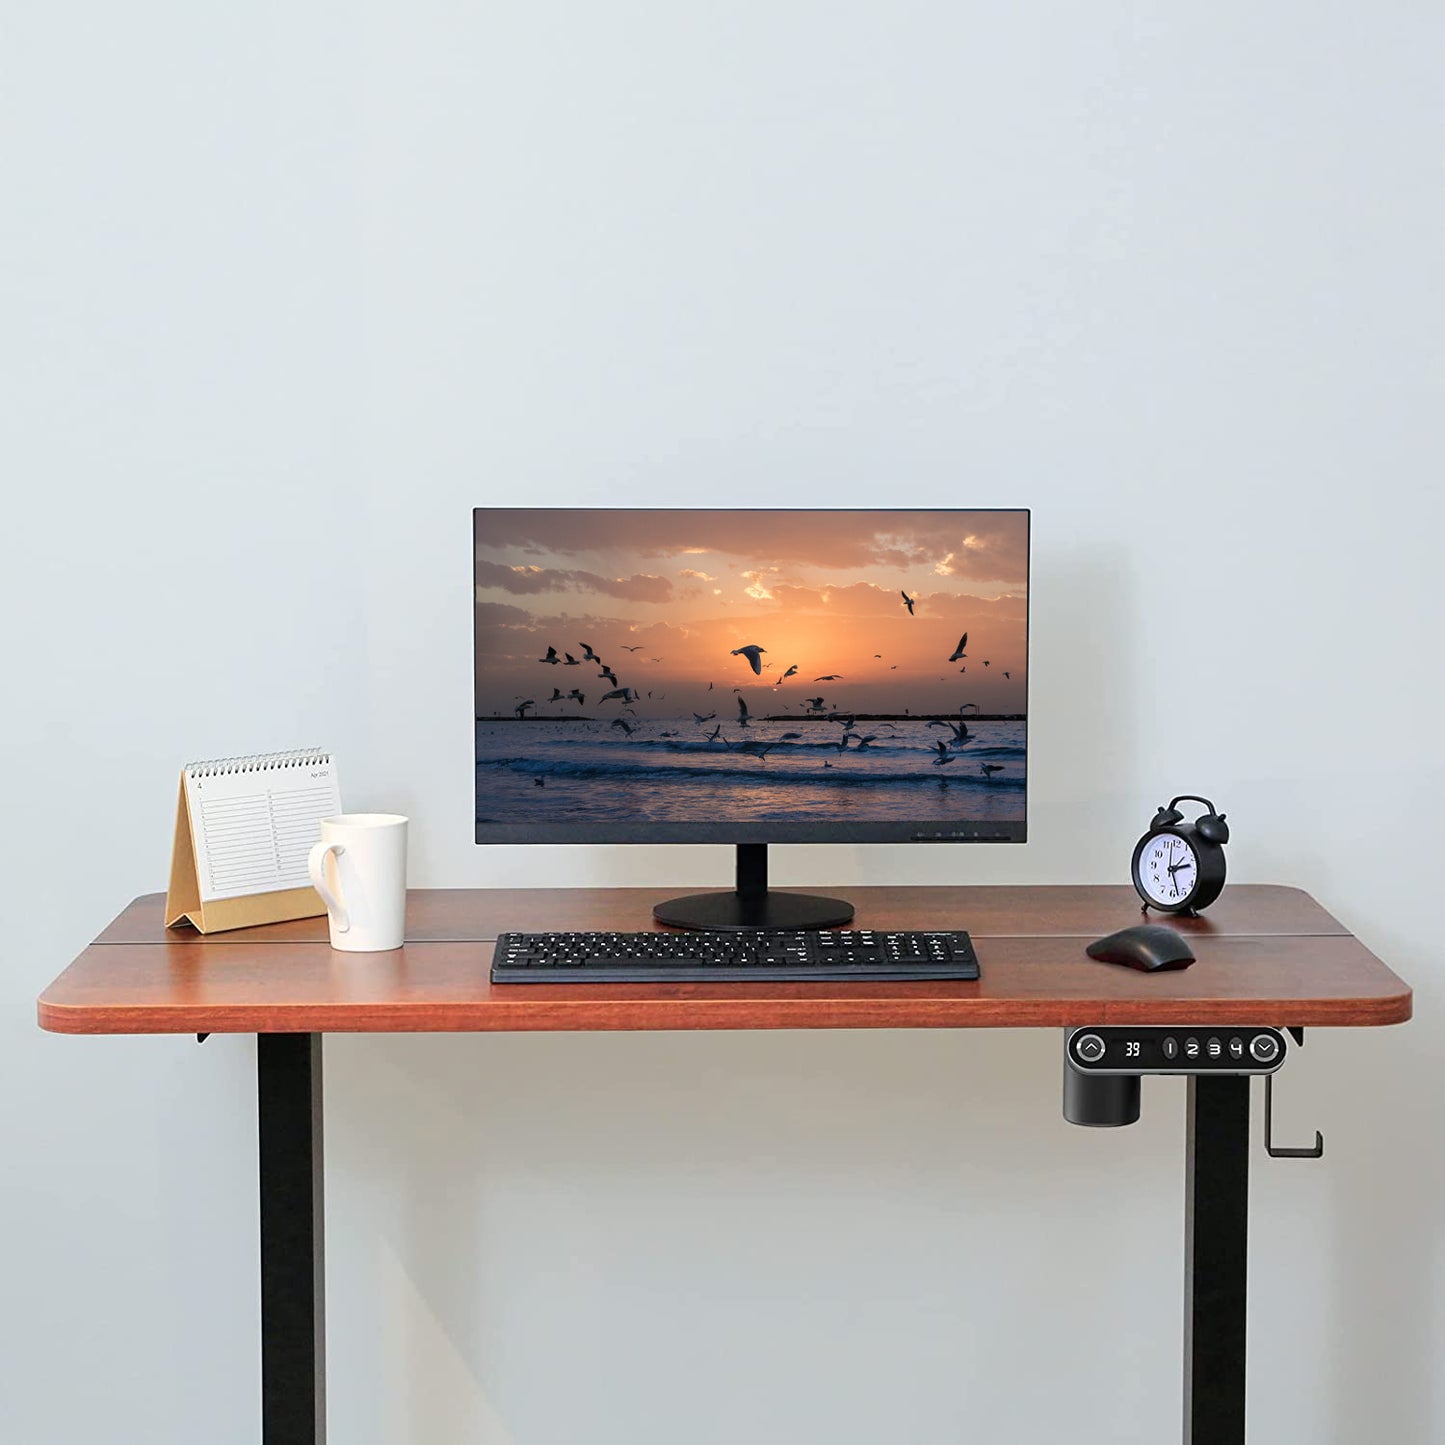 48'' Electric Sit Stand Desk